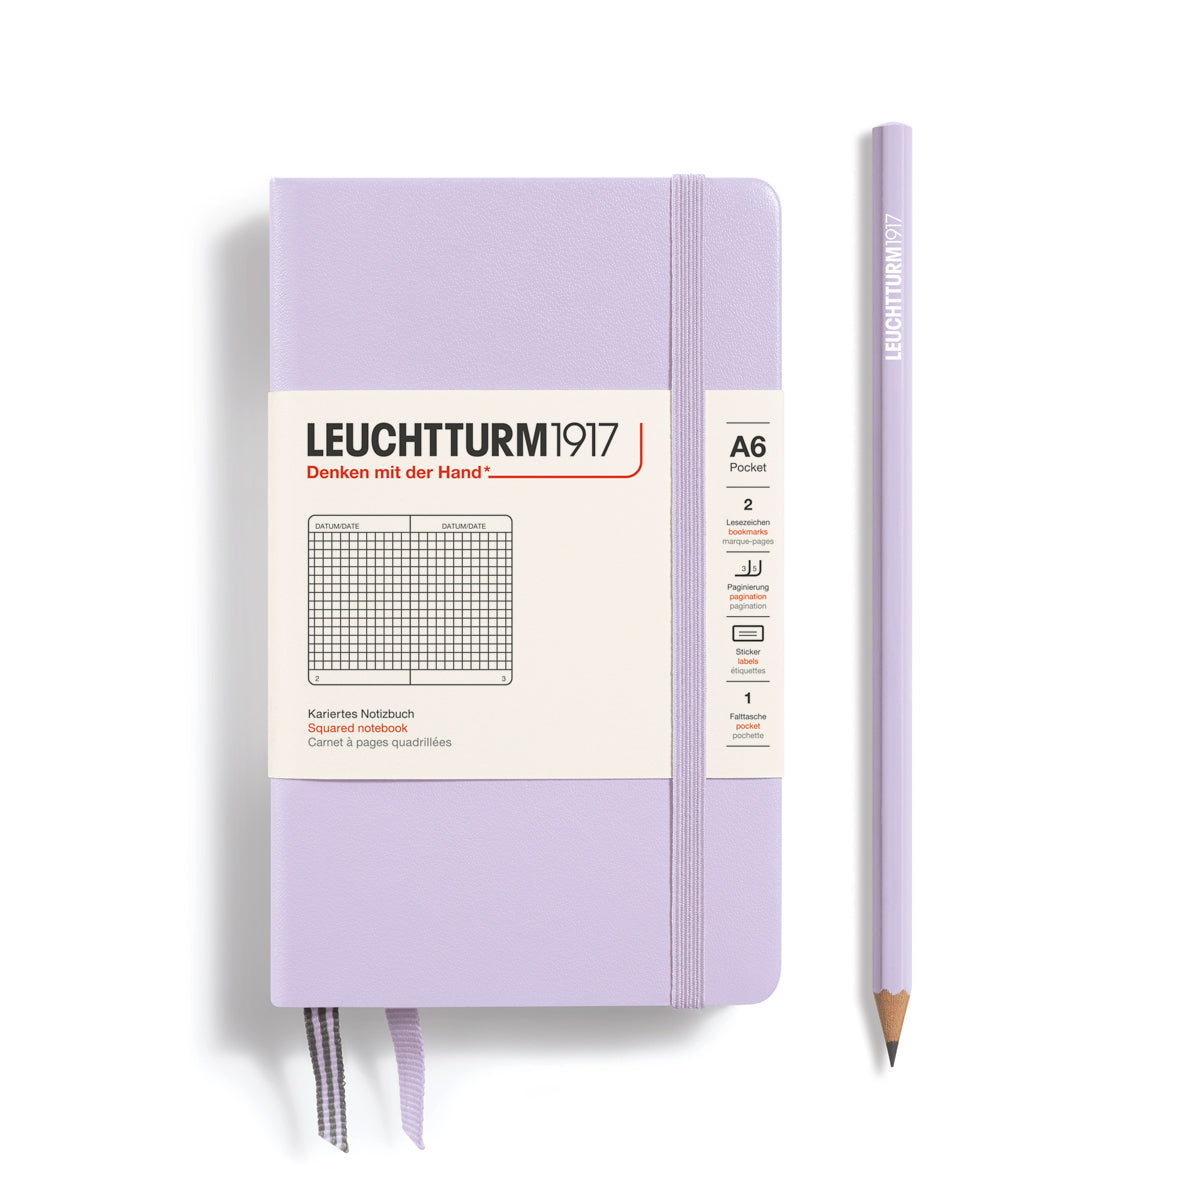 Leuchtturm1917 Notebook A6 Pocket Hardcover in lilac and squared ruling from penny black